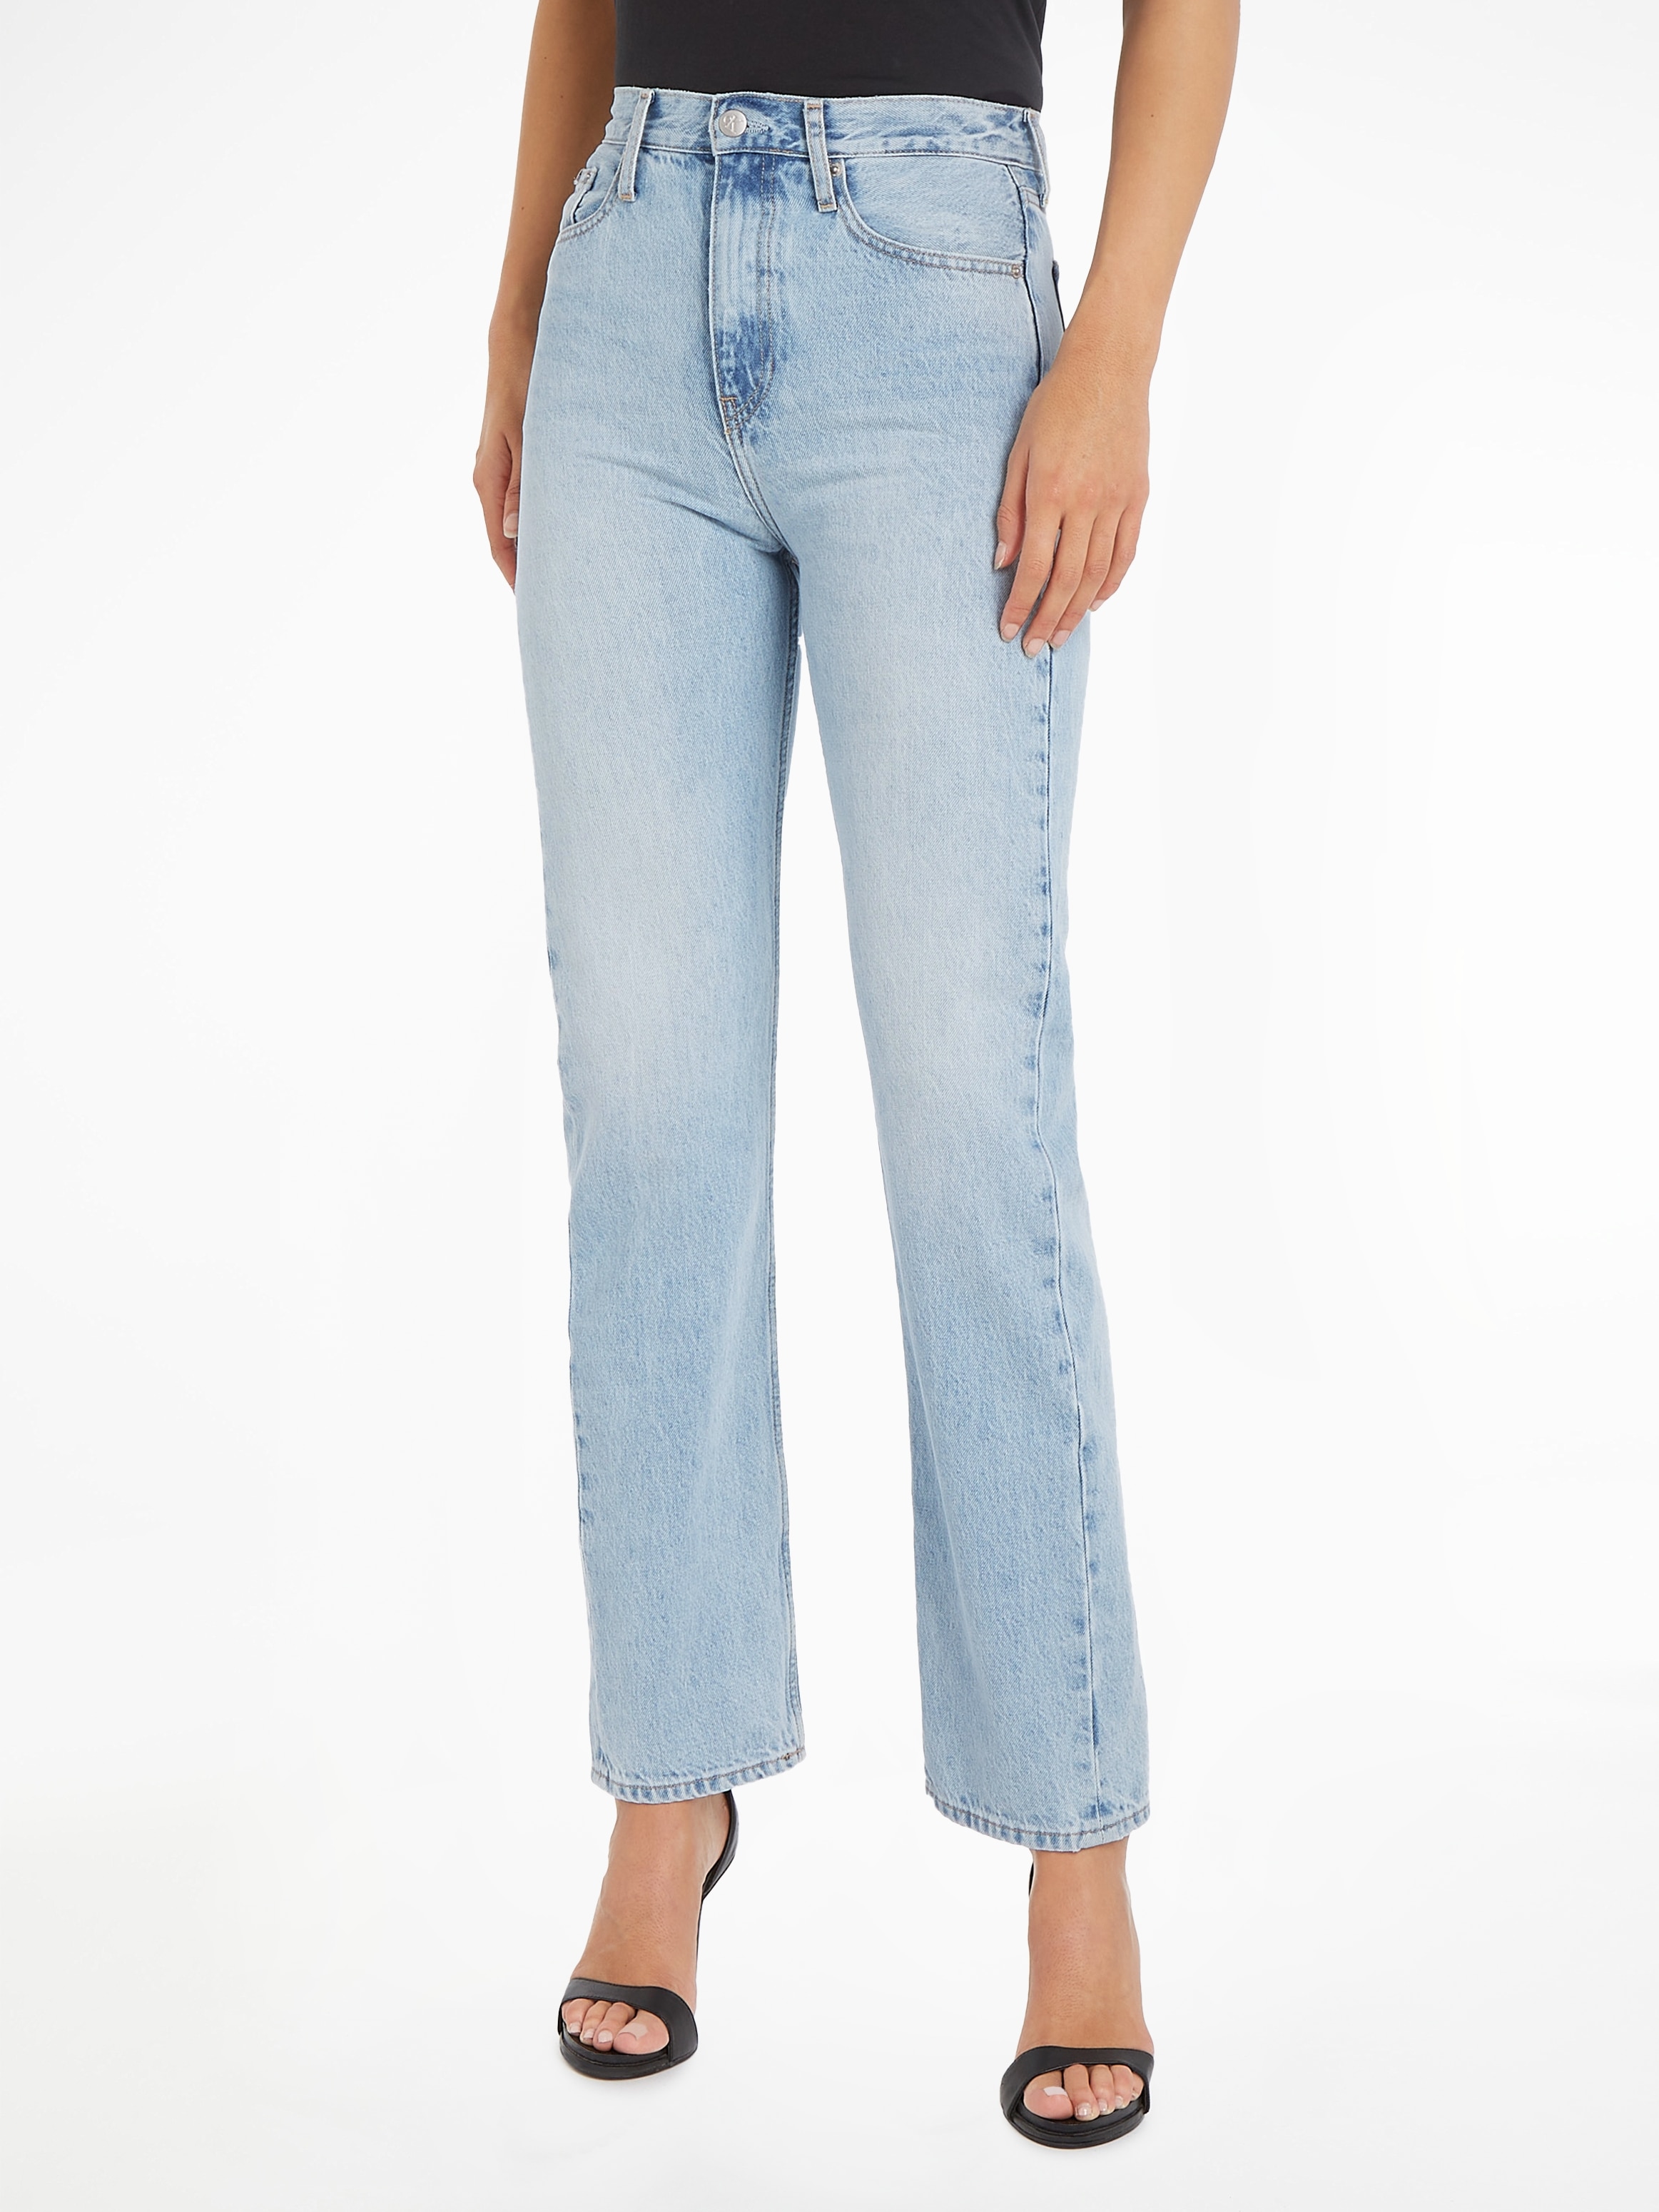 Jeans im bei RISE Straight-Jeans 5-Pocket-Style Klein ♕ STRAIGHT«, »HIGH Calvin